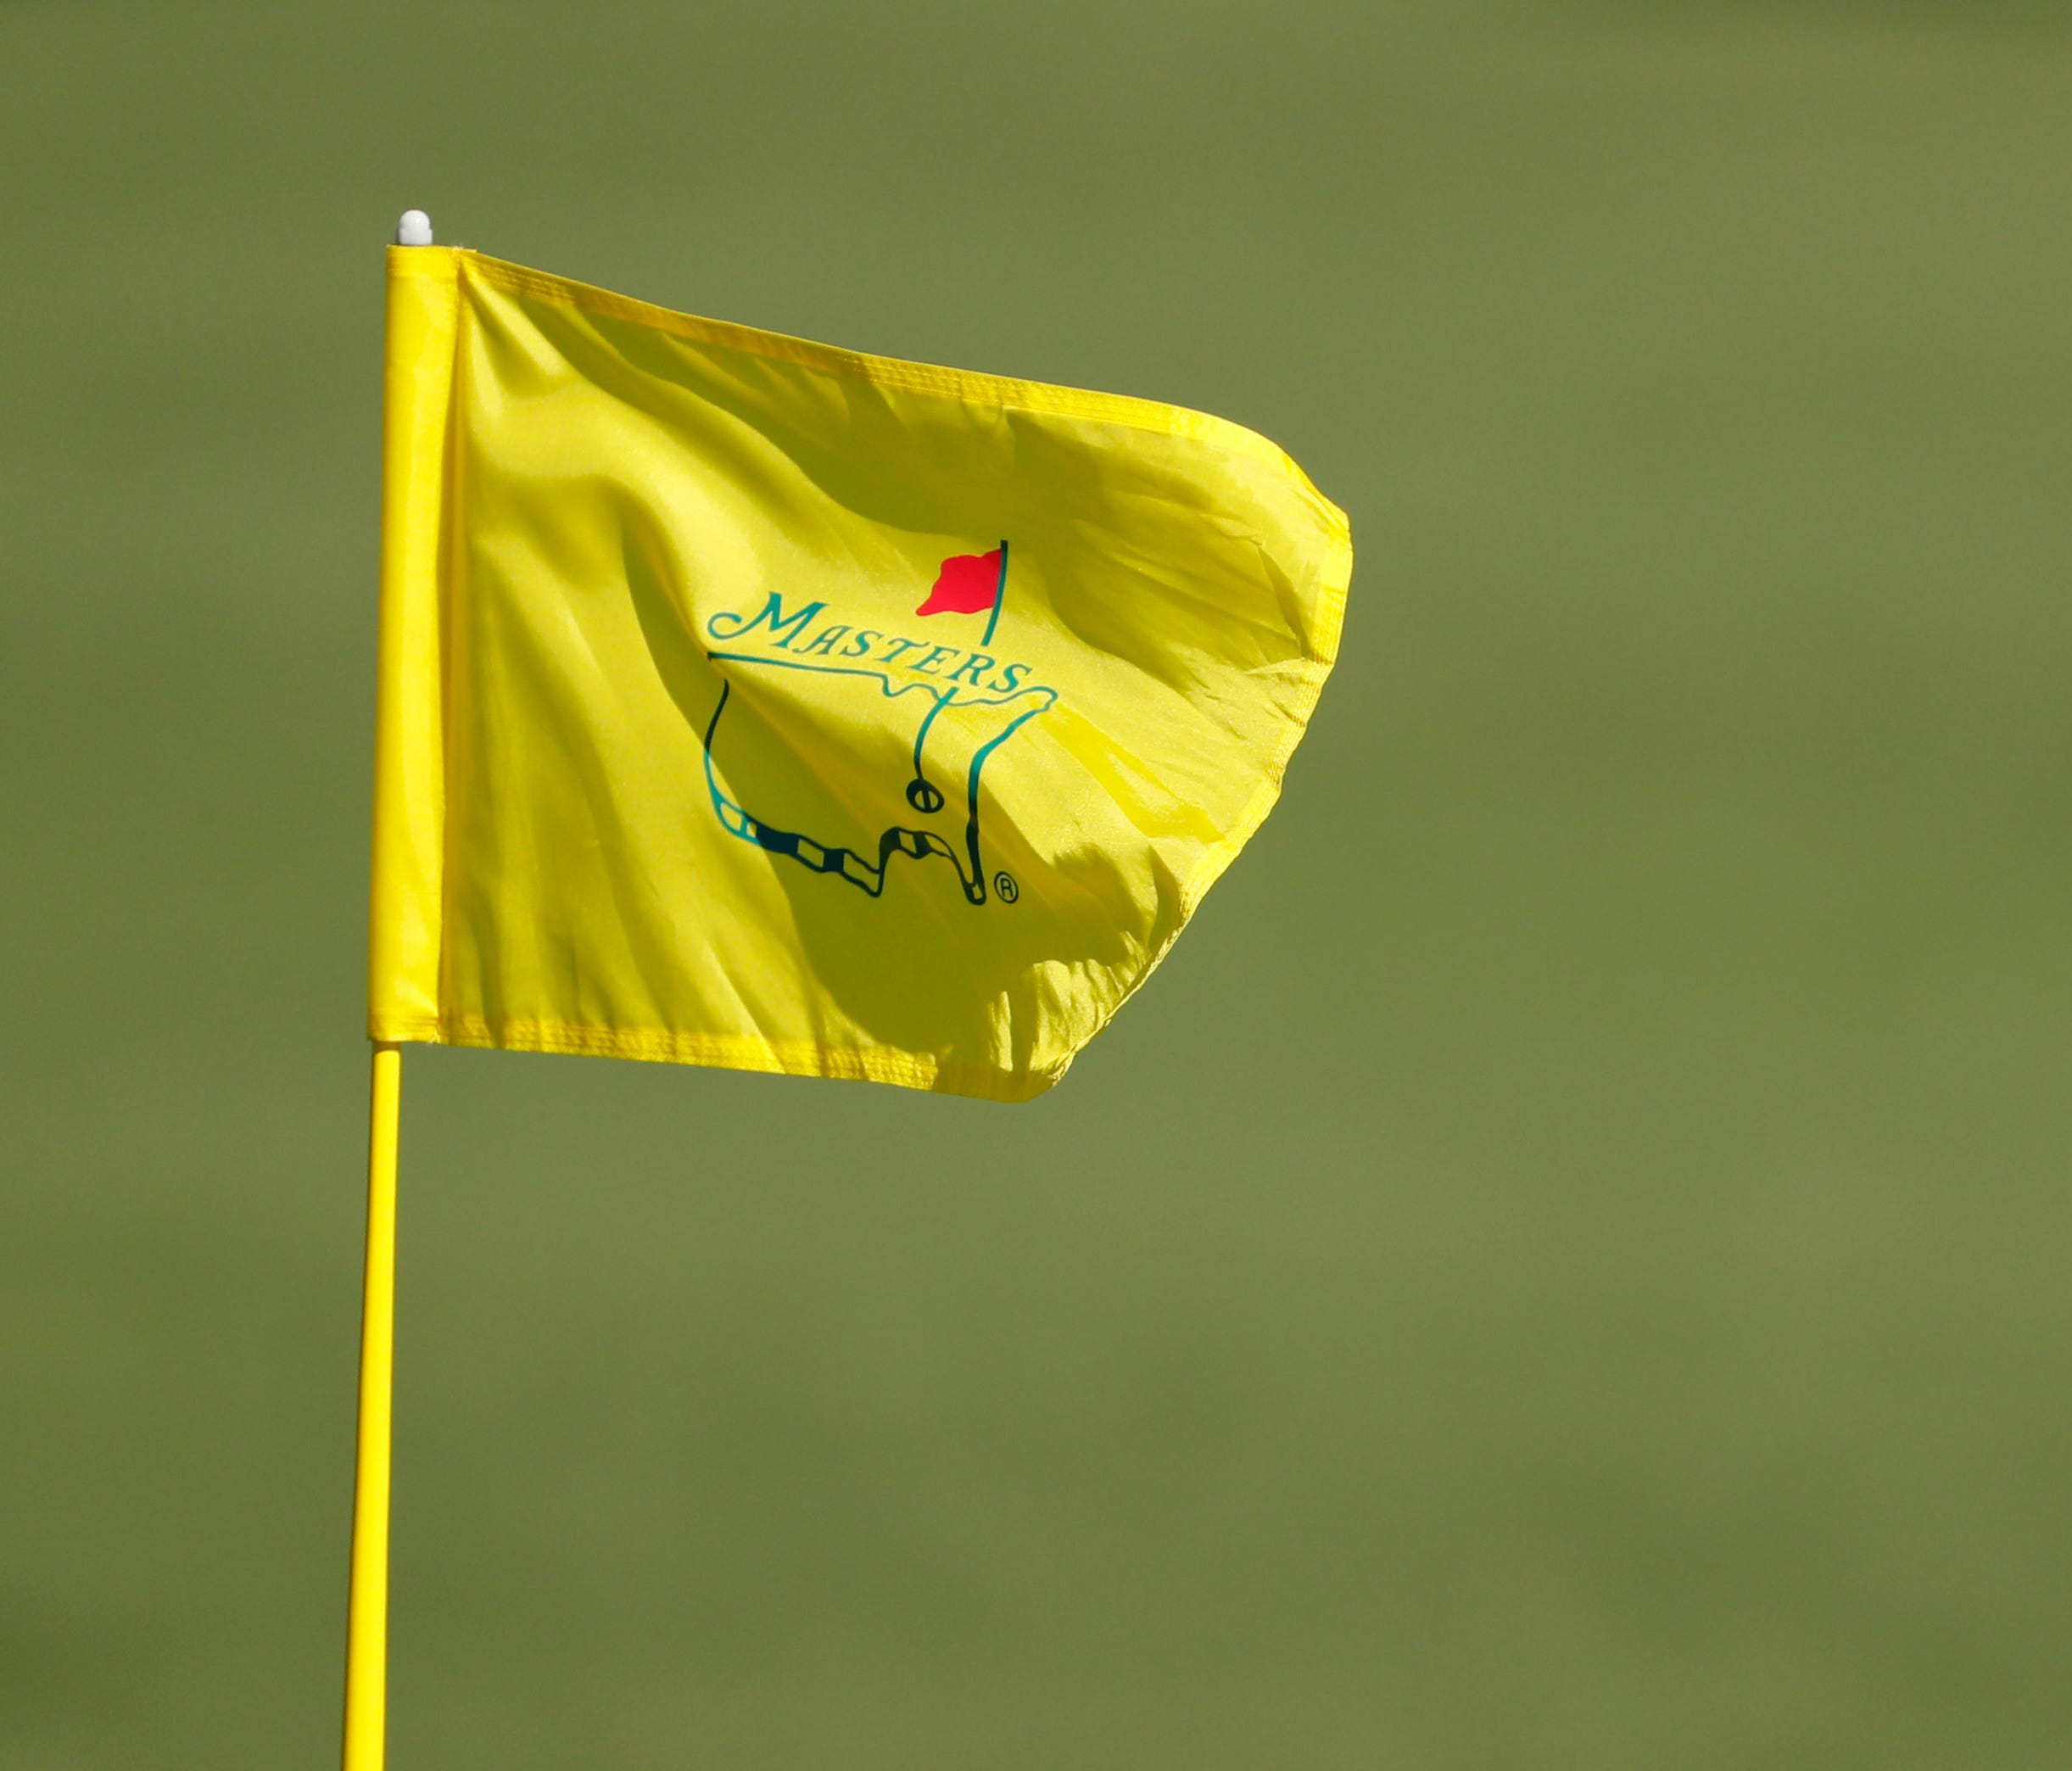 Apr 8, 2016; Augusta, GA, USA; General view of the flag stick on the 2nd hole during the second round of the 2016 The Masters golf tournament at Augusta National Golf Club. Mandatory Credit: Rob Schumacher-USA TODAY Sports